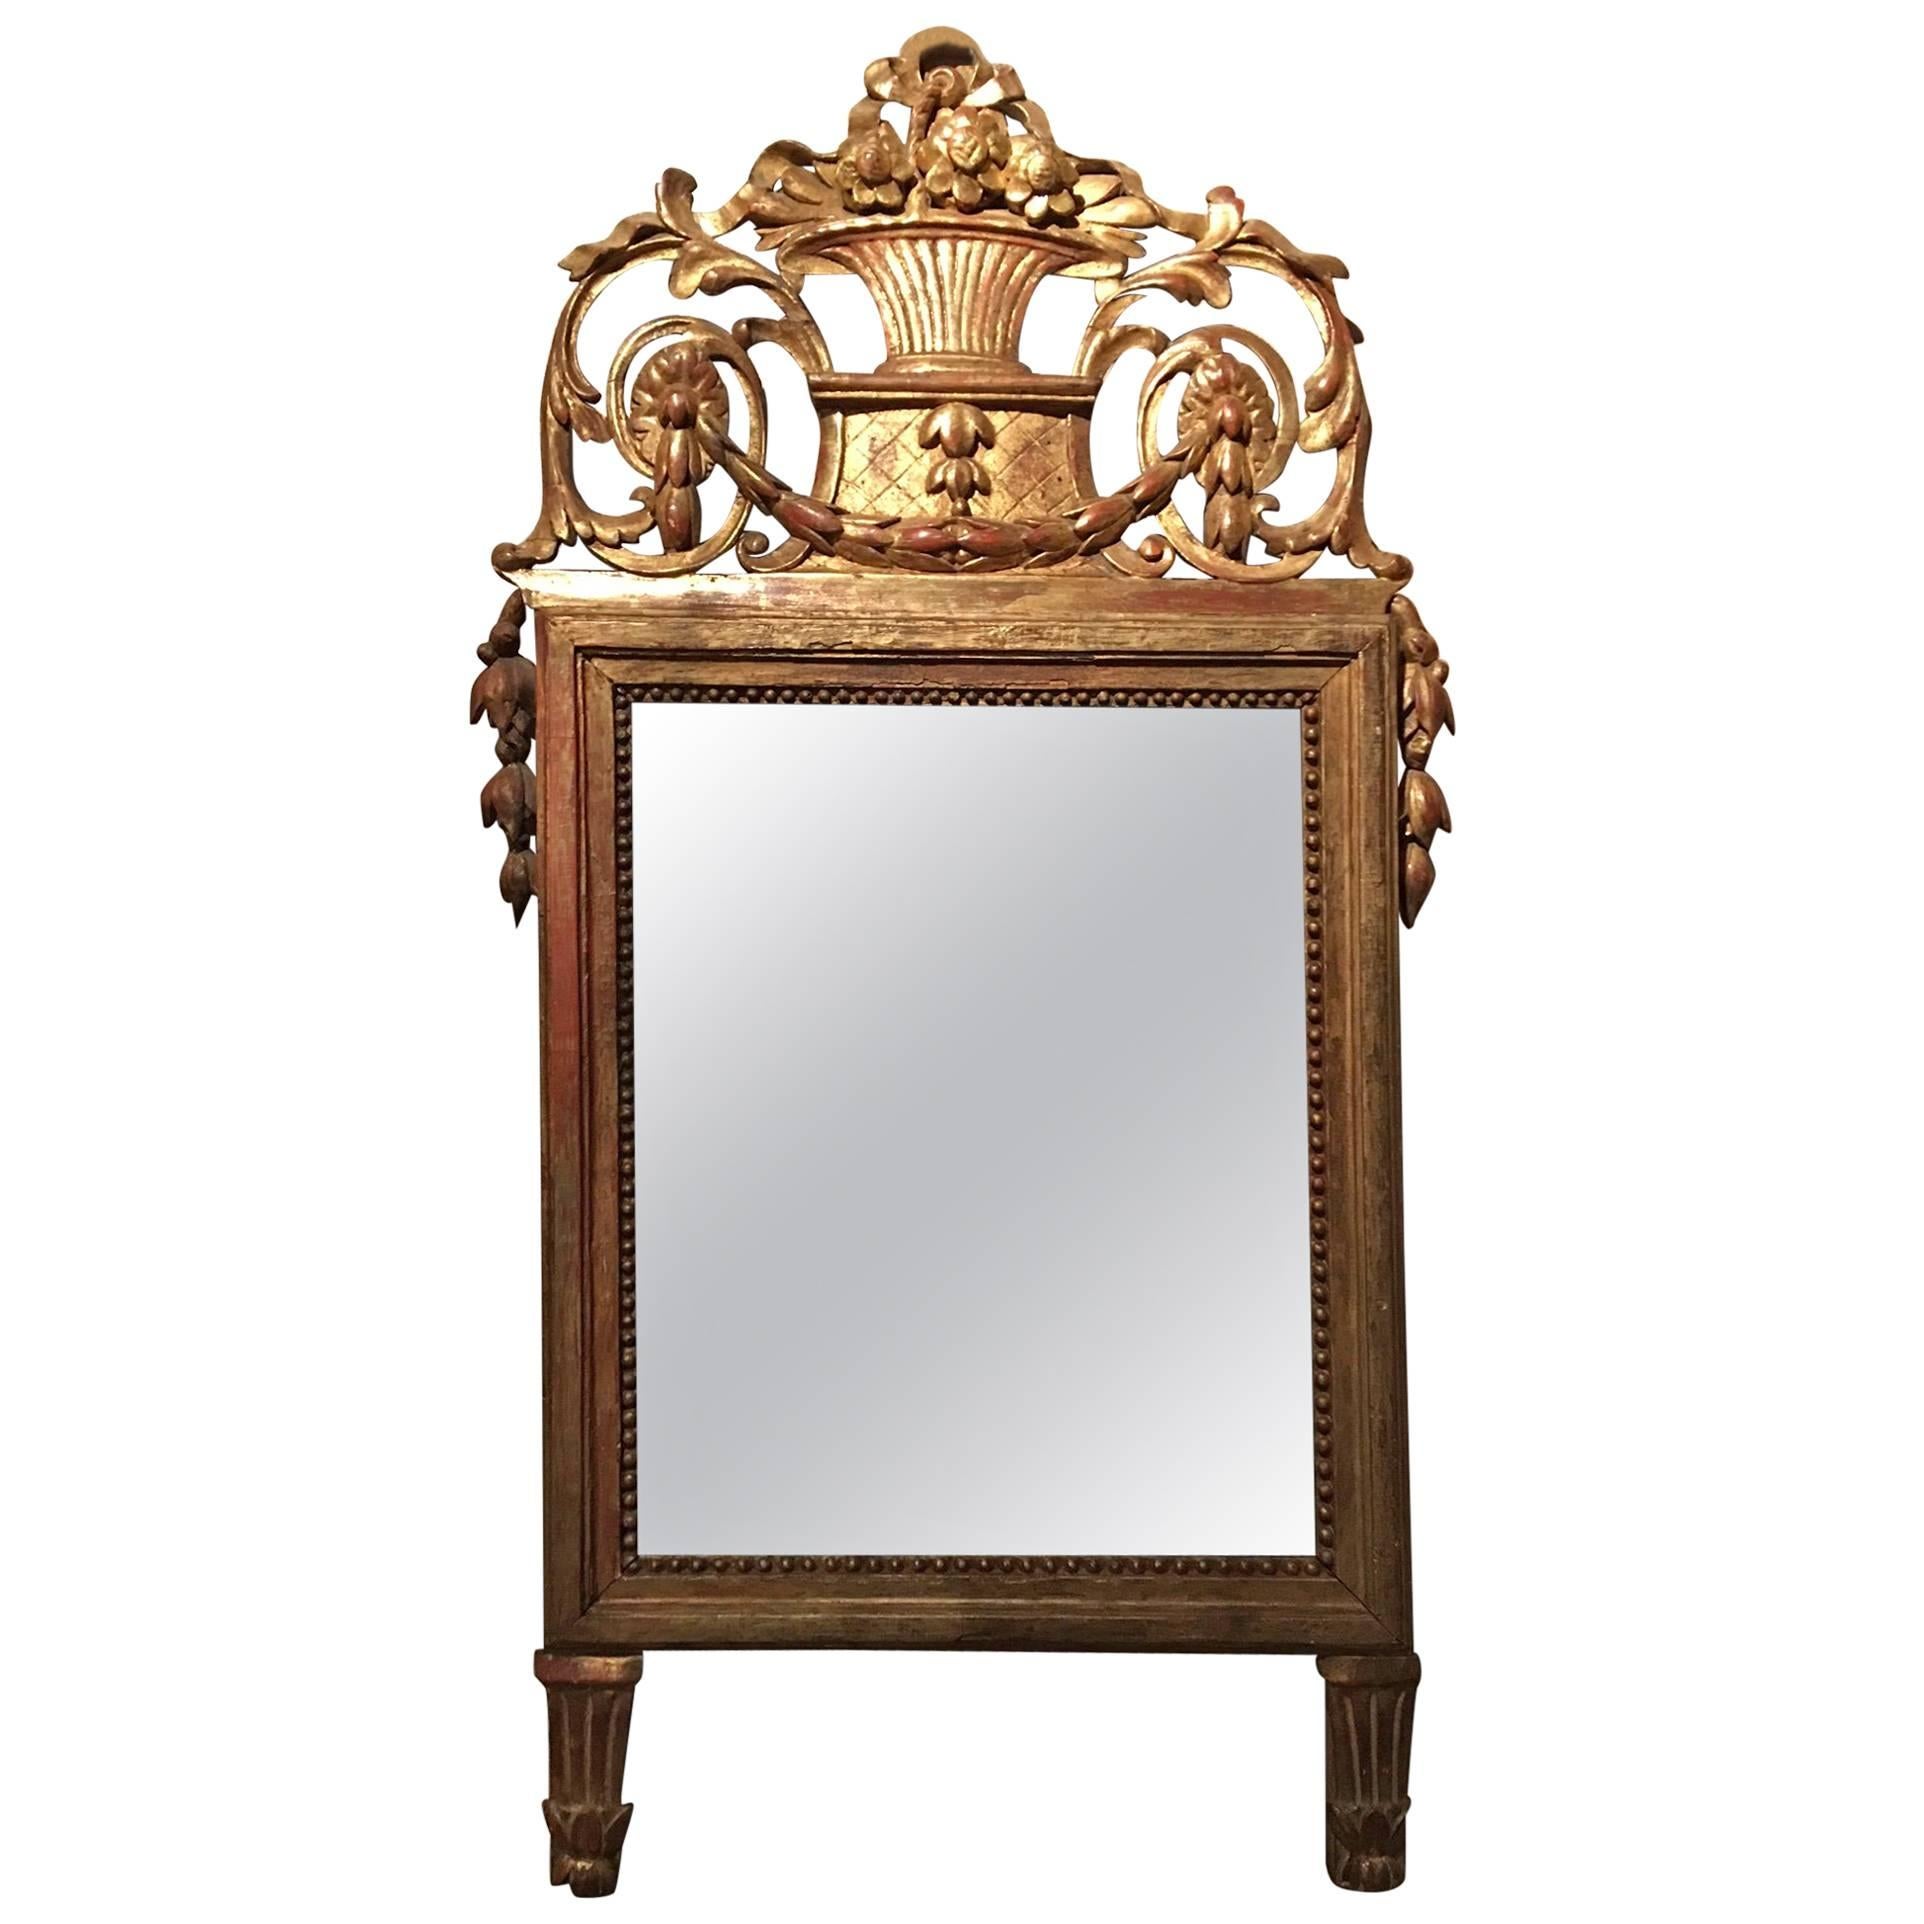 Italian Louis XVI Style Giltwood Mirror with Bell Flower Swags, 19th Century For Sale